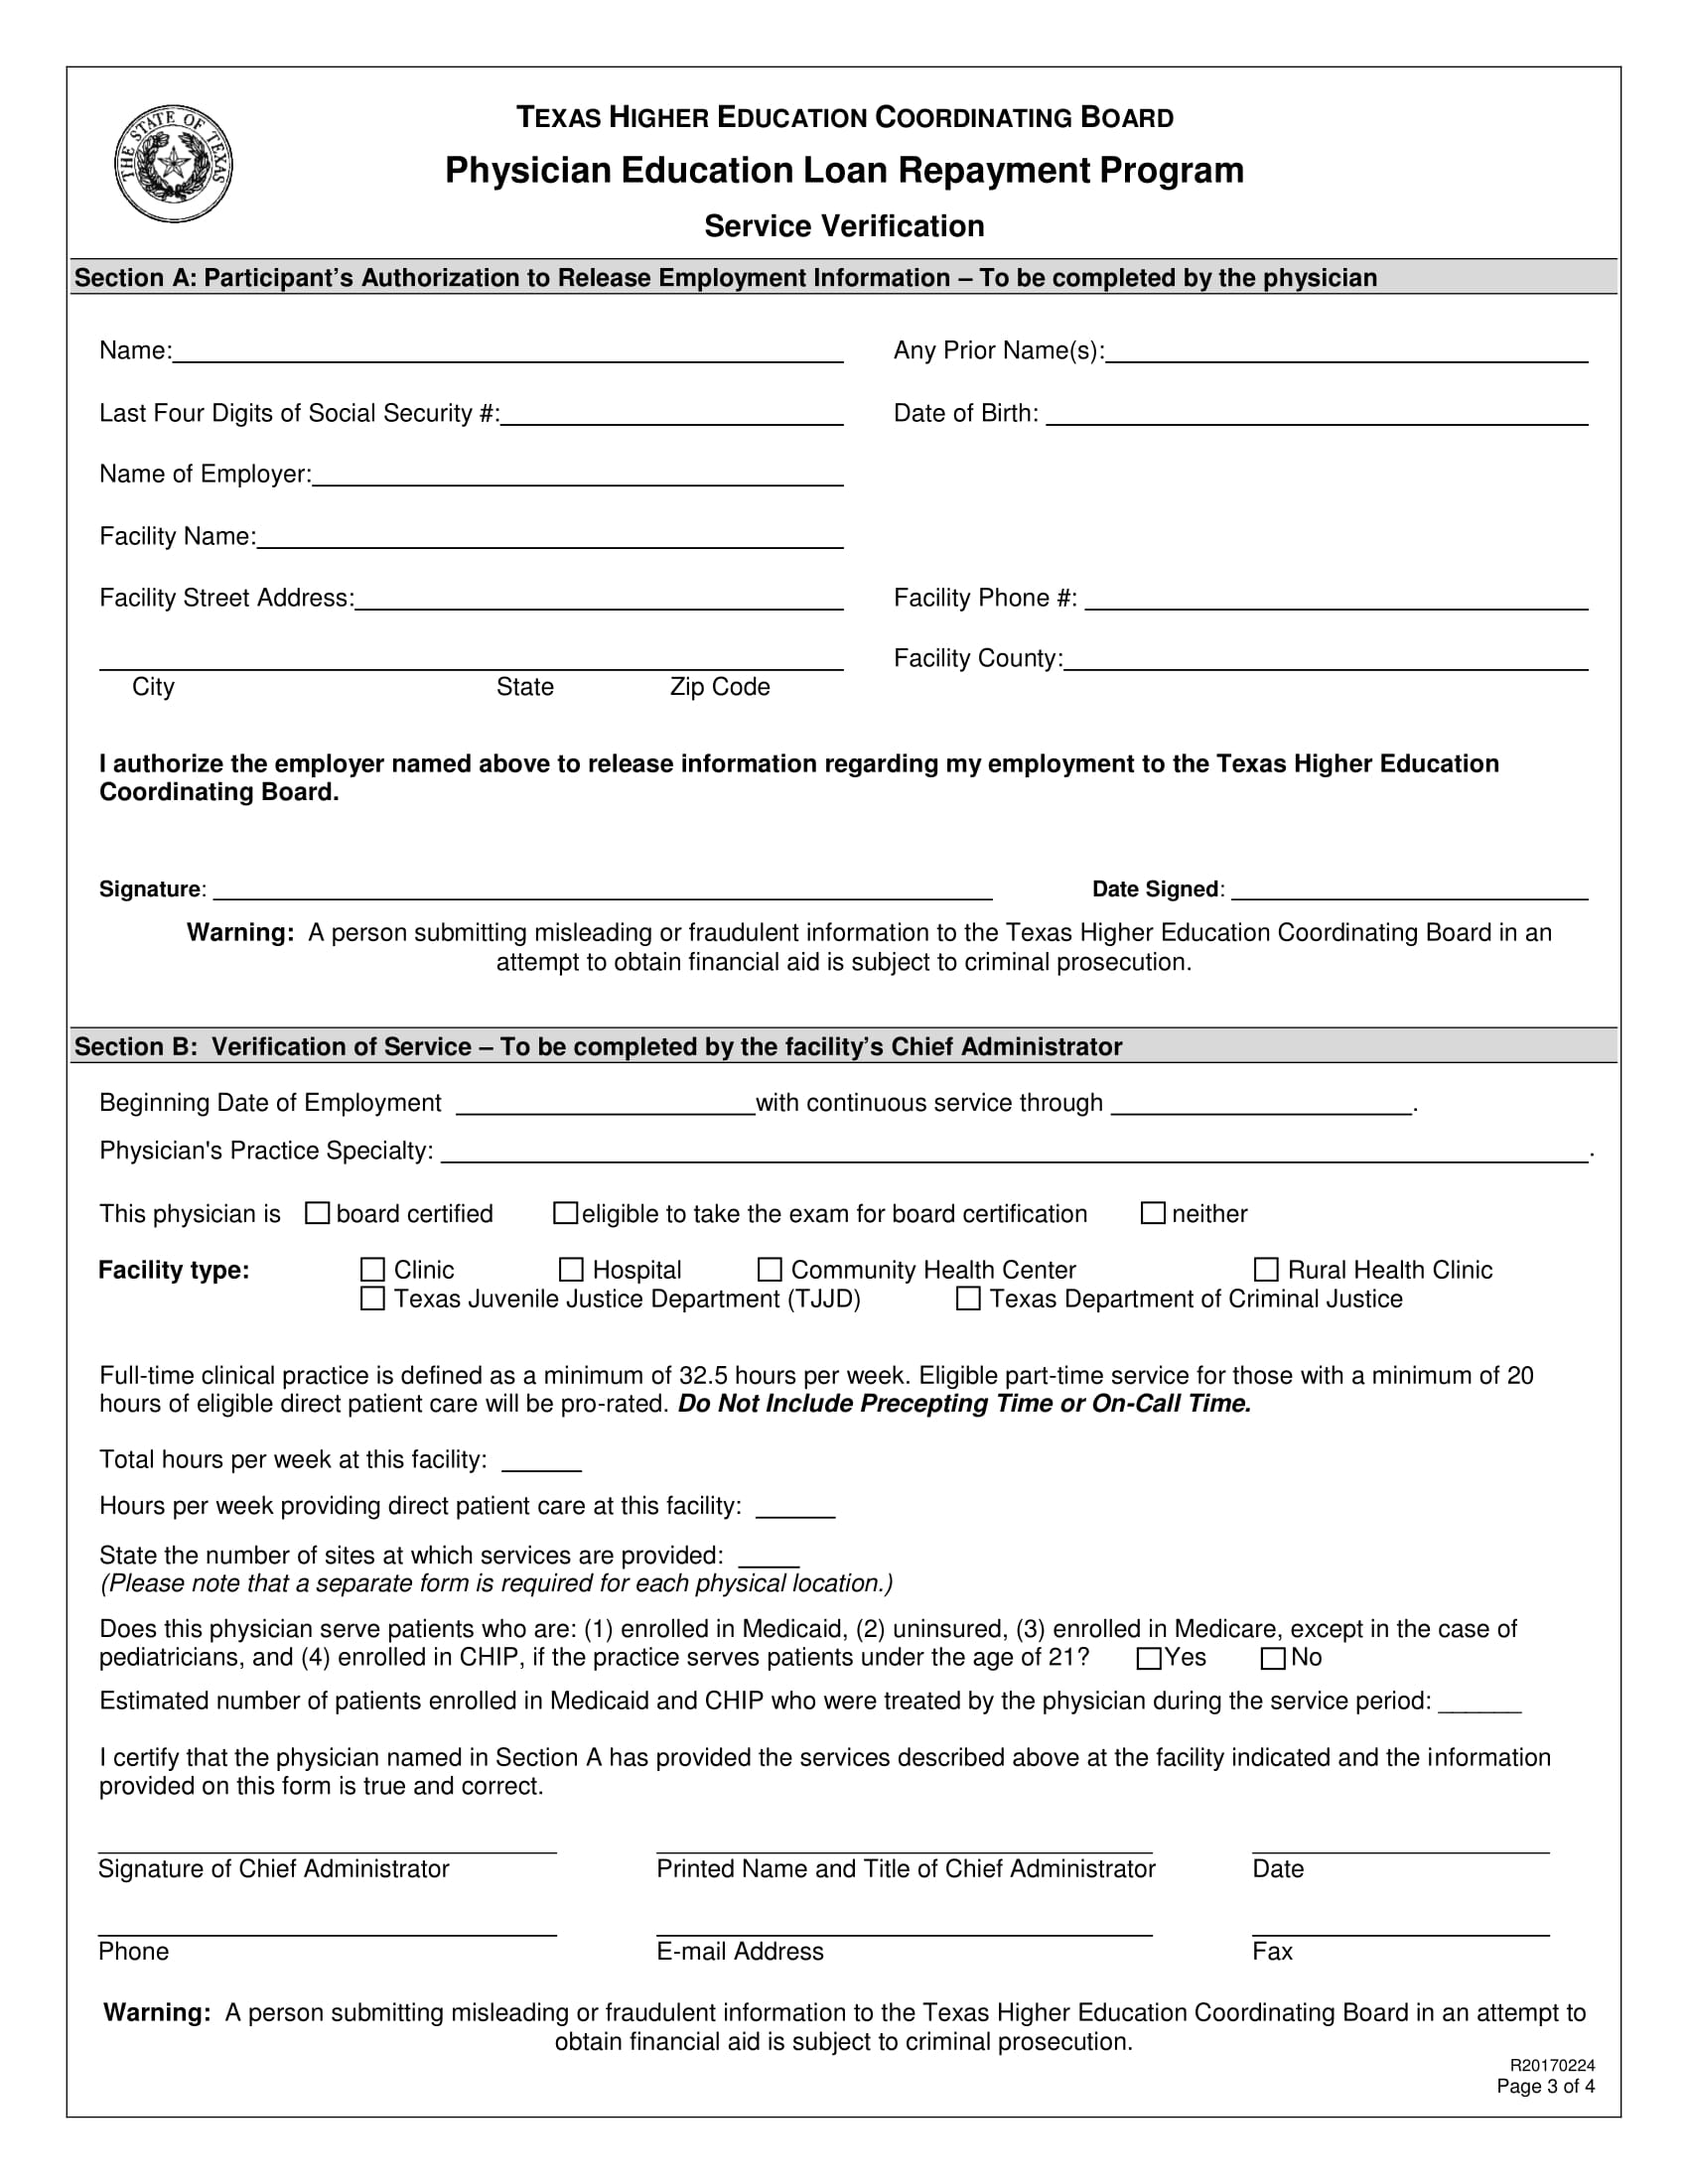 service and loan verification form 3